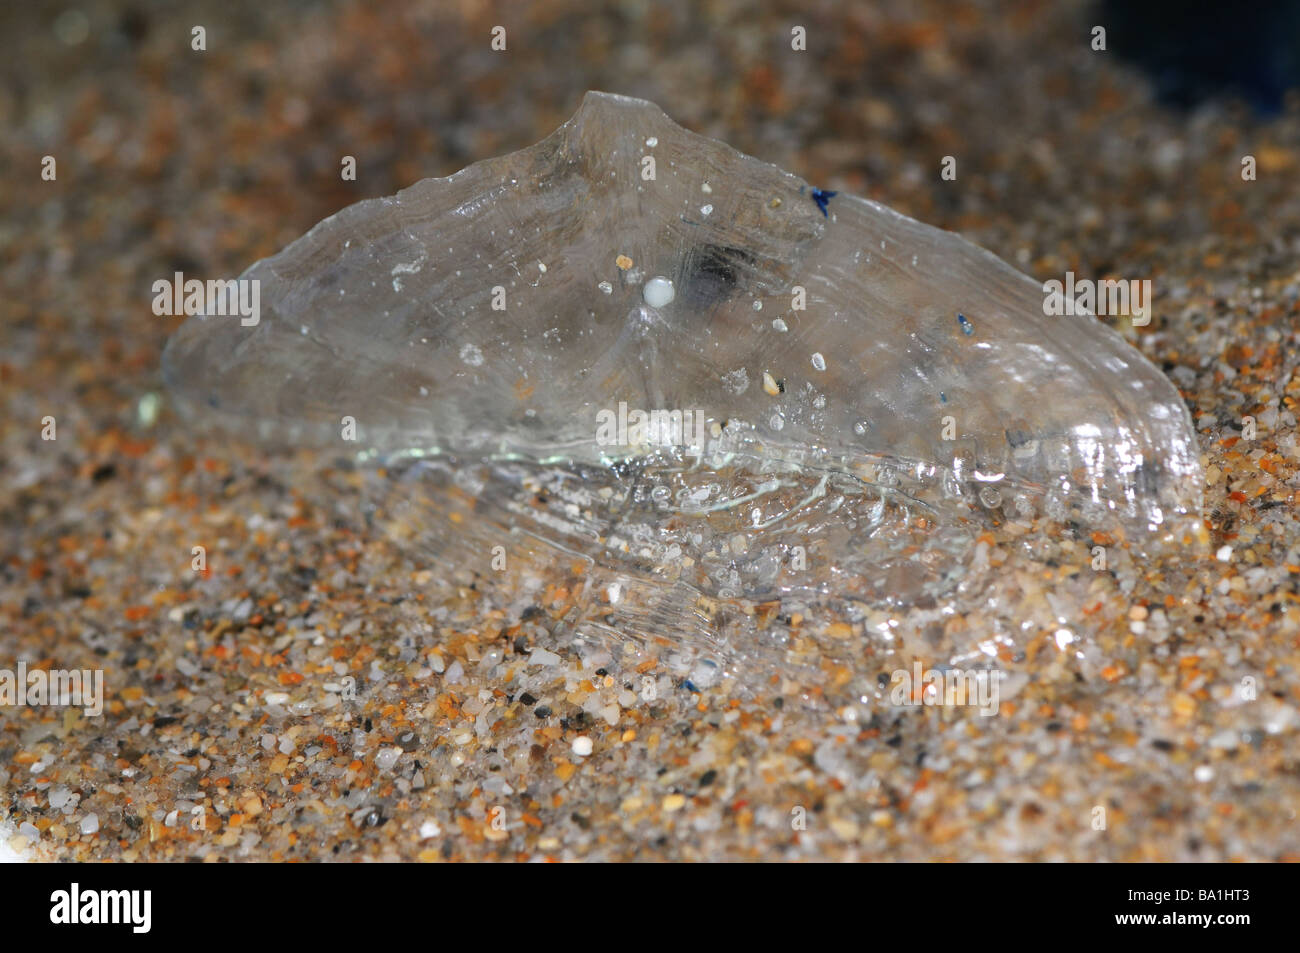 Velella, a free-floating Hydrozoan living on the surface of the ocean Stock Photo